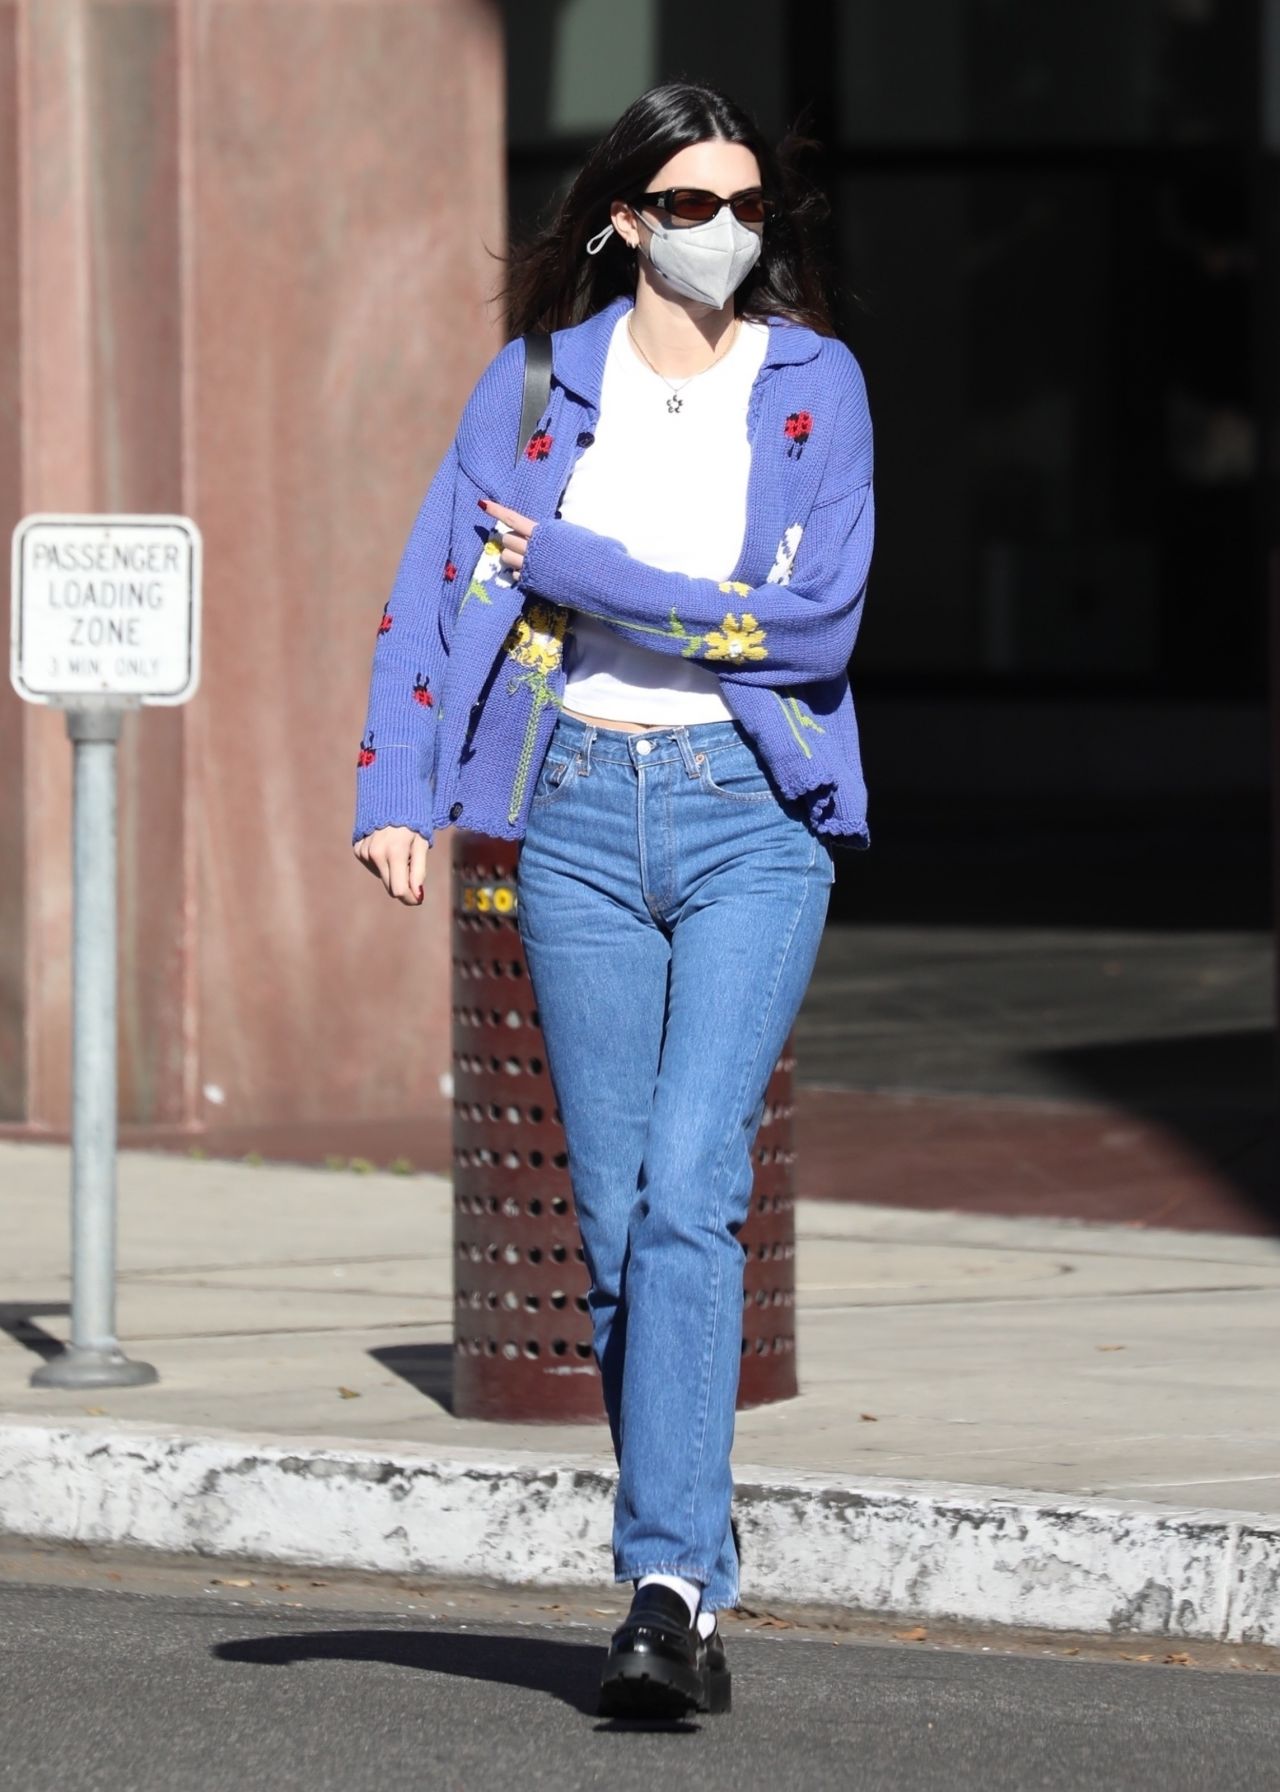 Kendall Jenner Out in Los Angeles June 27, 2012 – Star Style